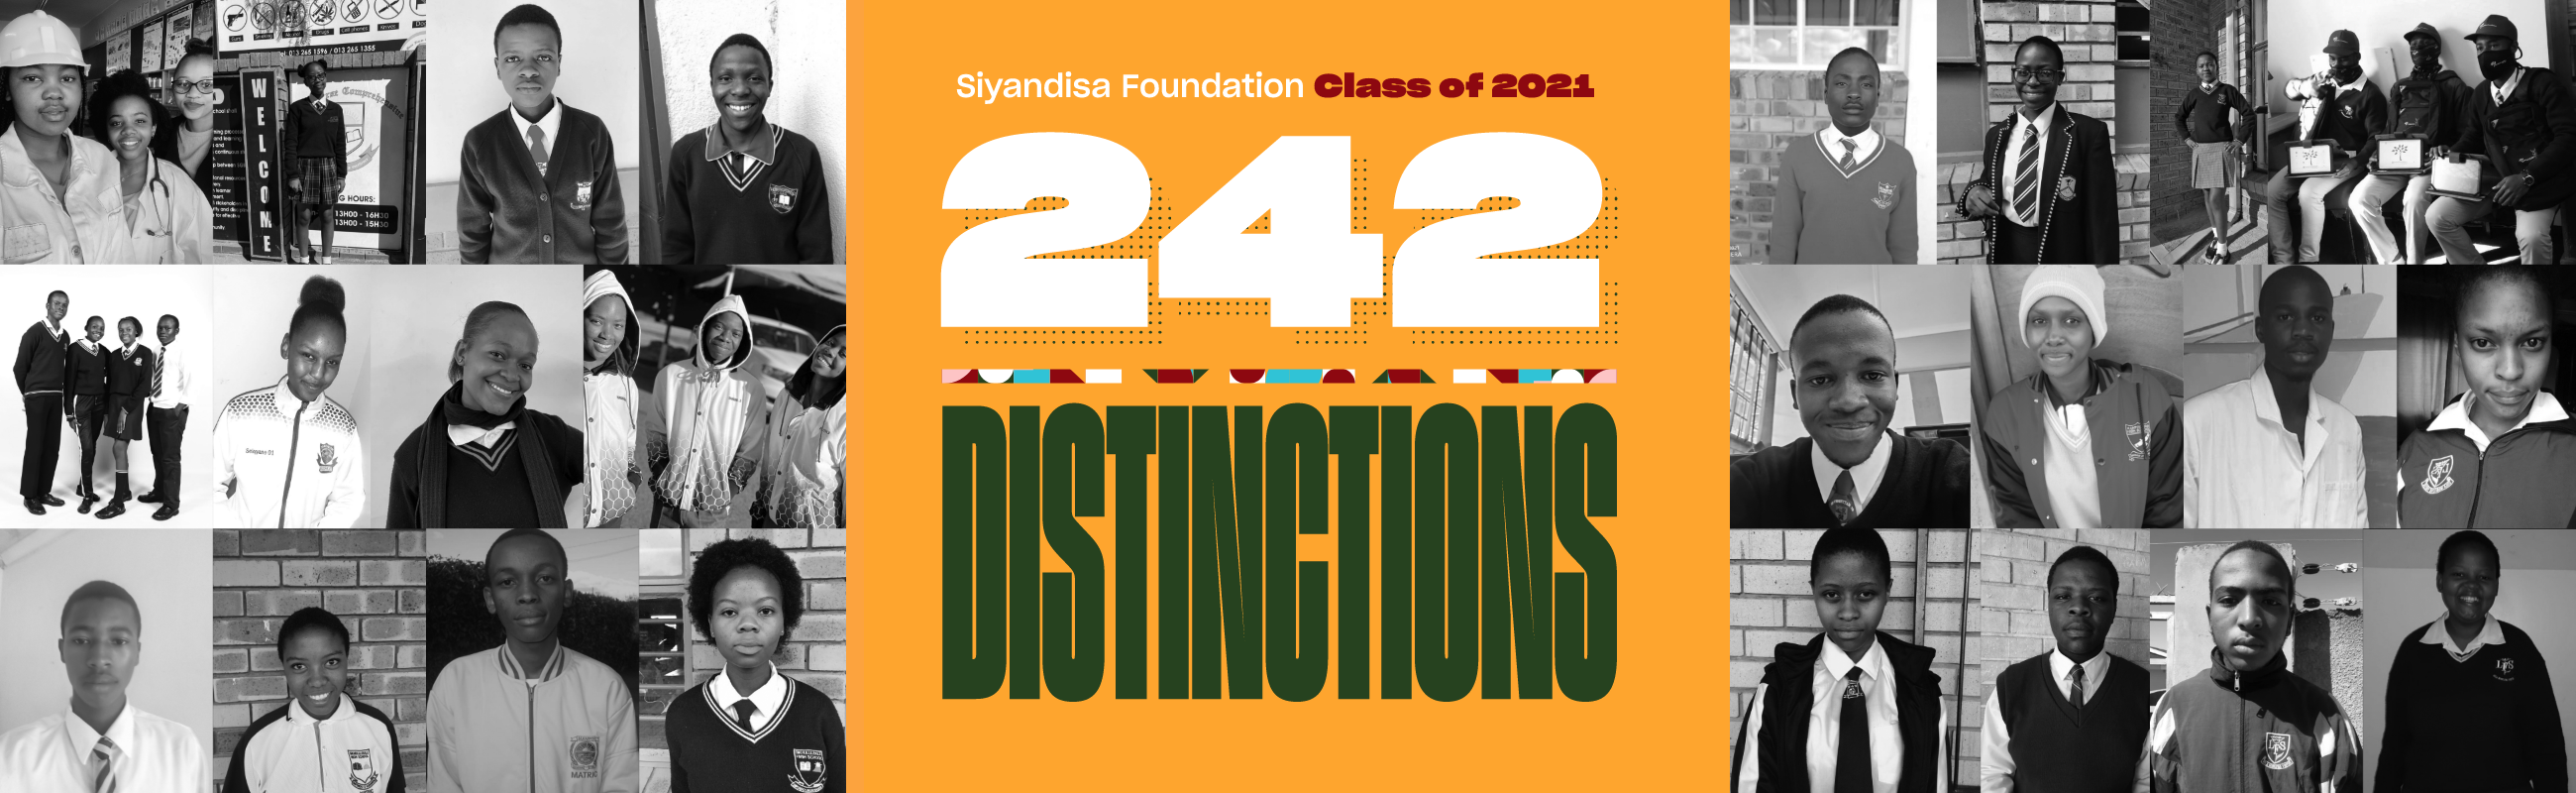 242 distinctions for the Siyandisa Foundation Class of 2021!